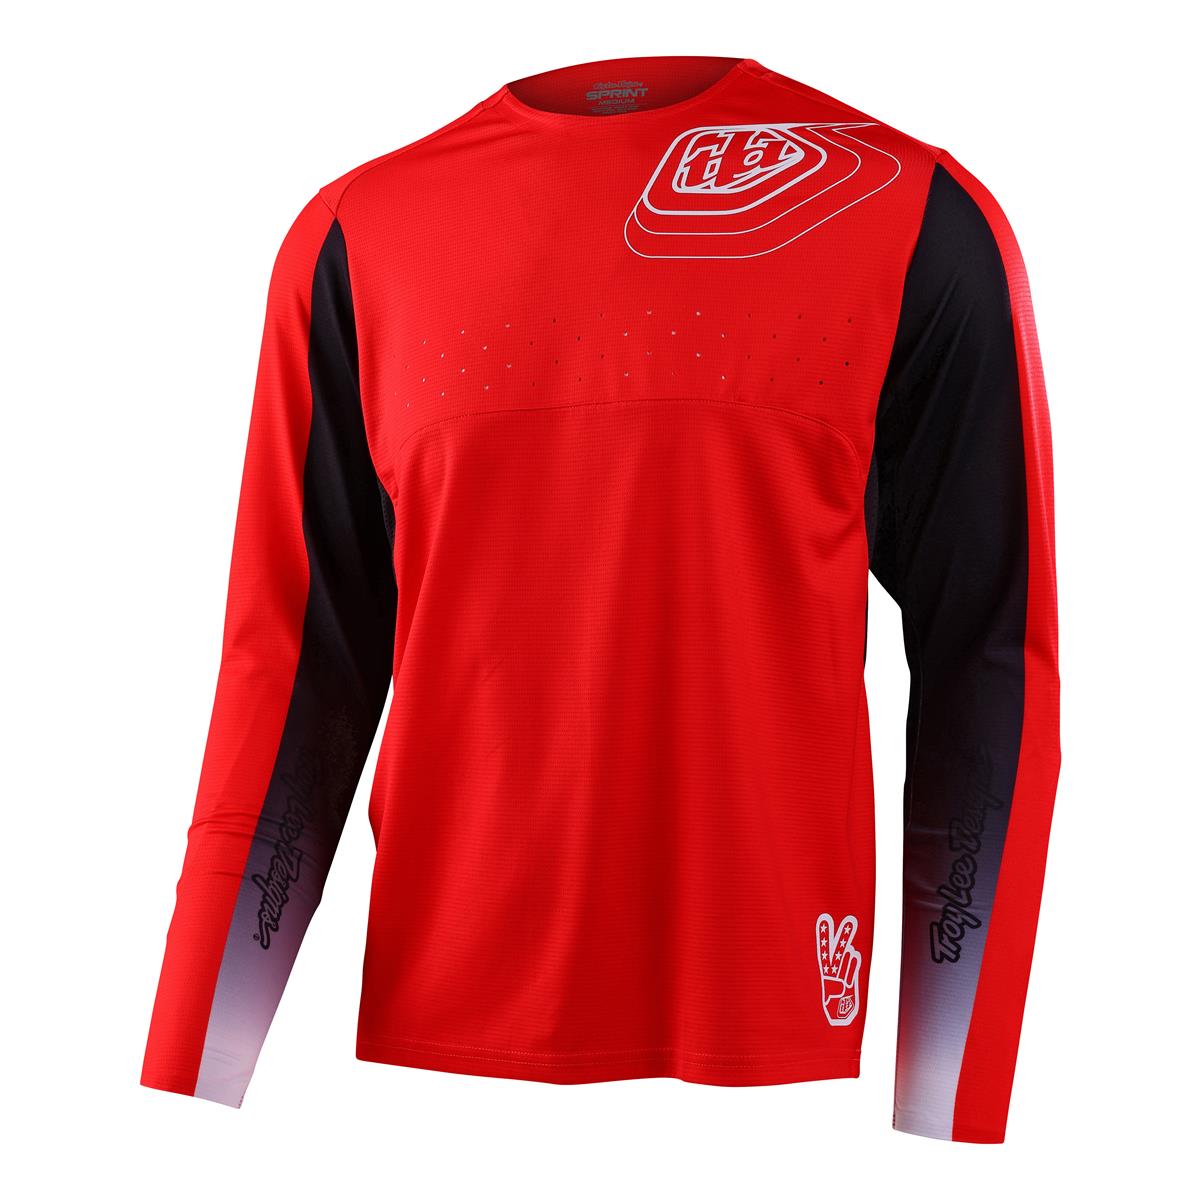 Troy Lee Designs Maillot VTT manches longues Sprint Richter - Race Red